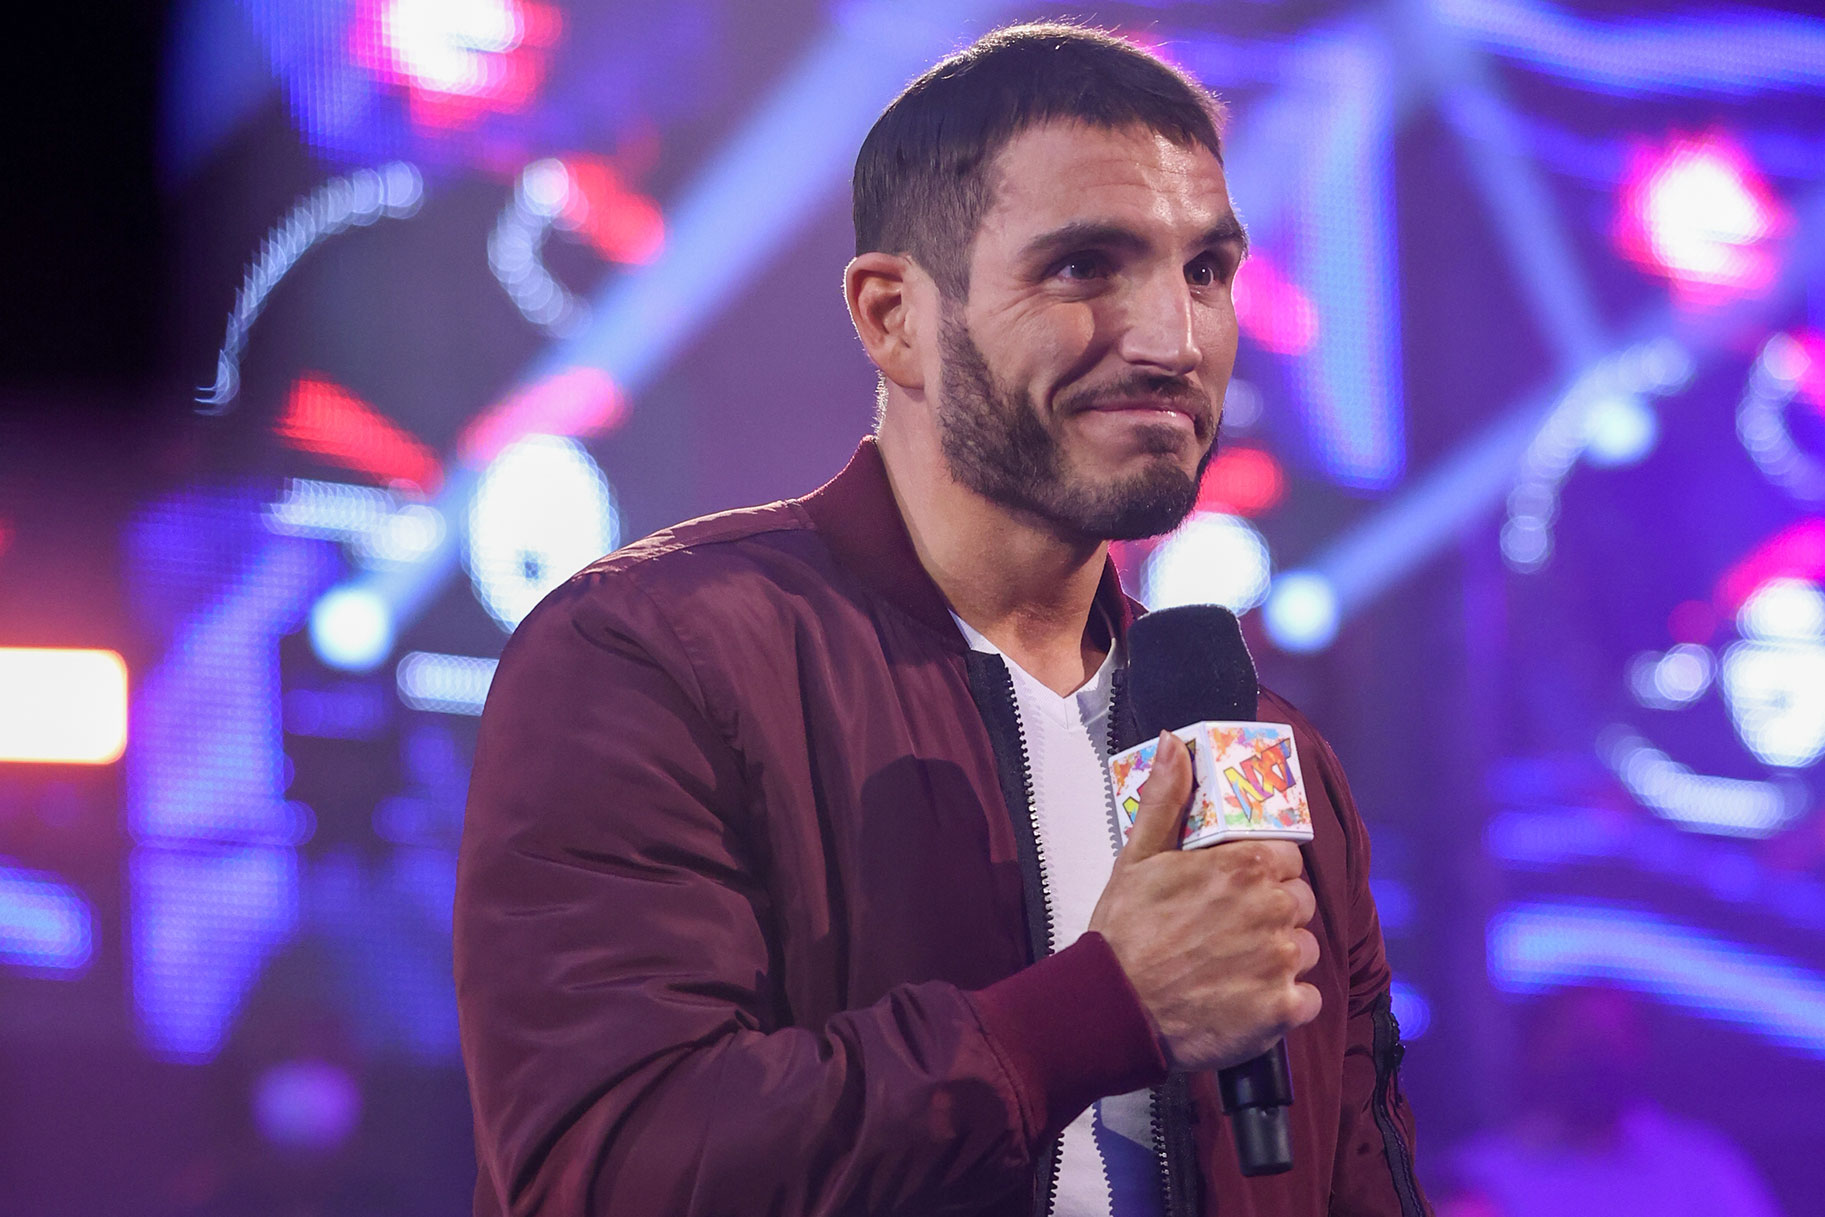 Johnny Gargano holding an NXT microphone in the ring